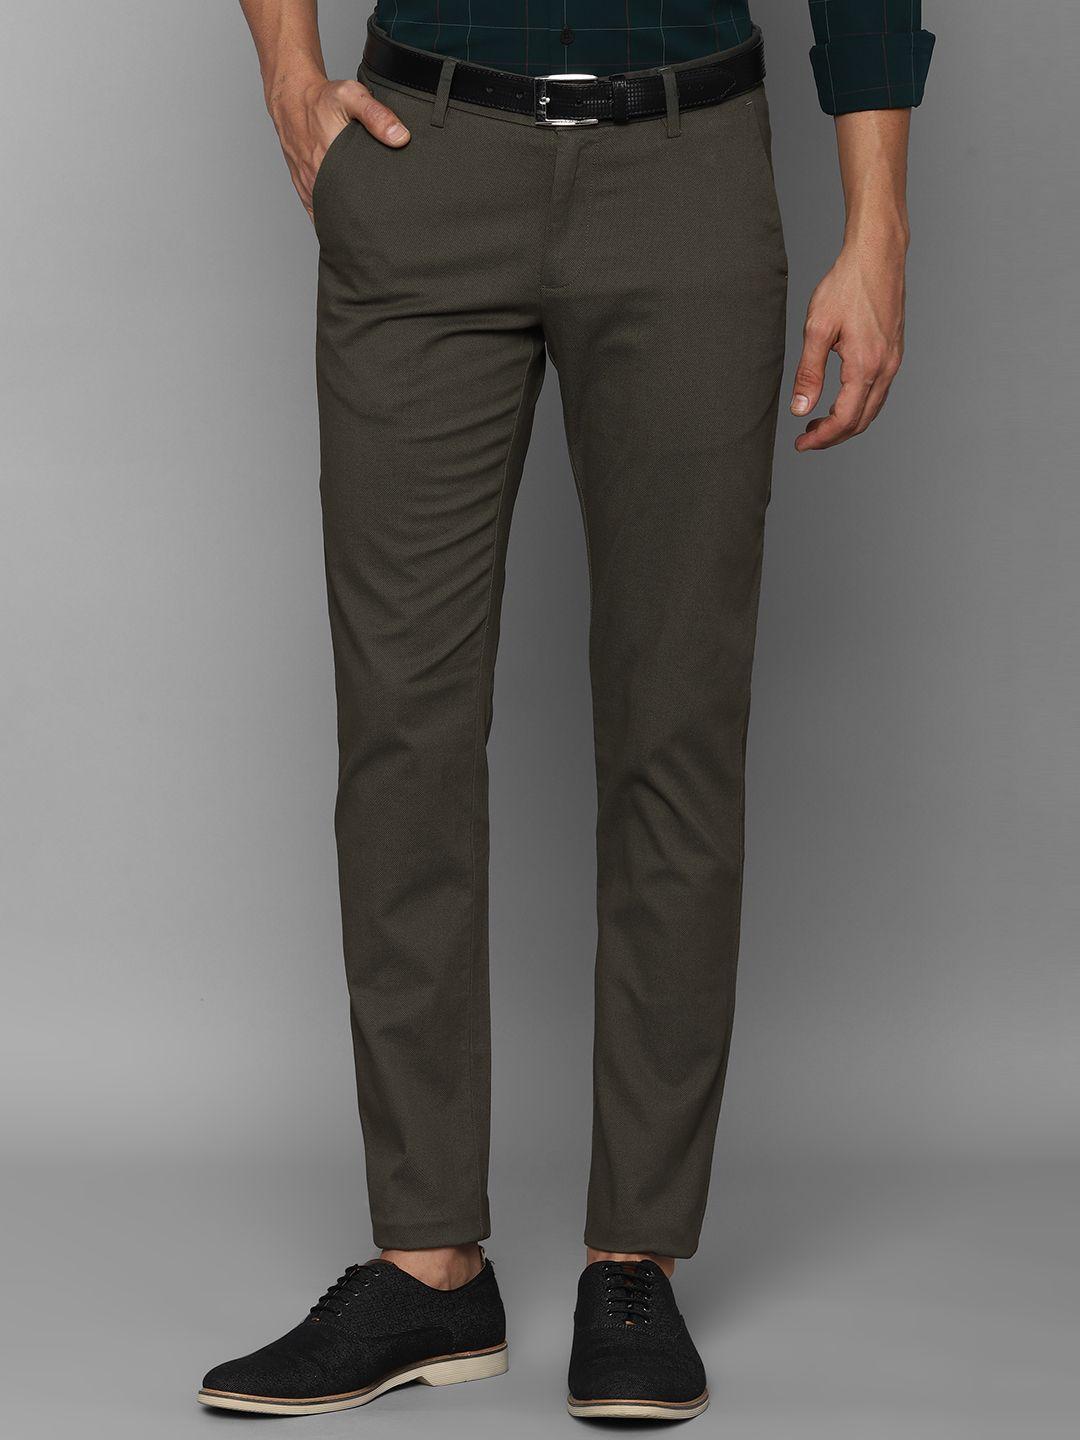 allen-solly-men-olive-green-slim-fit-mid-rise-casual-trousers